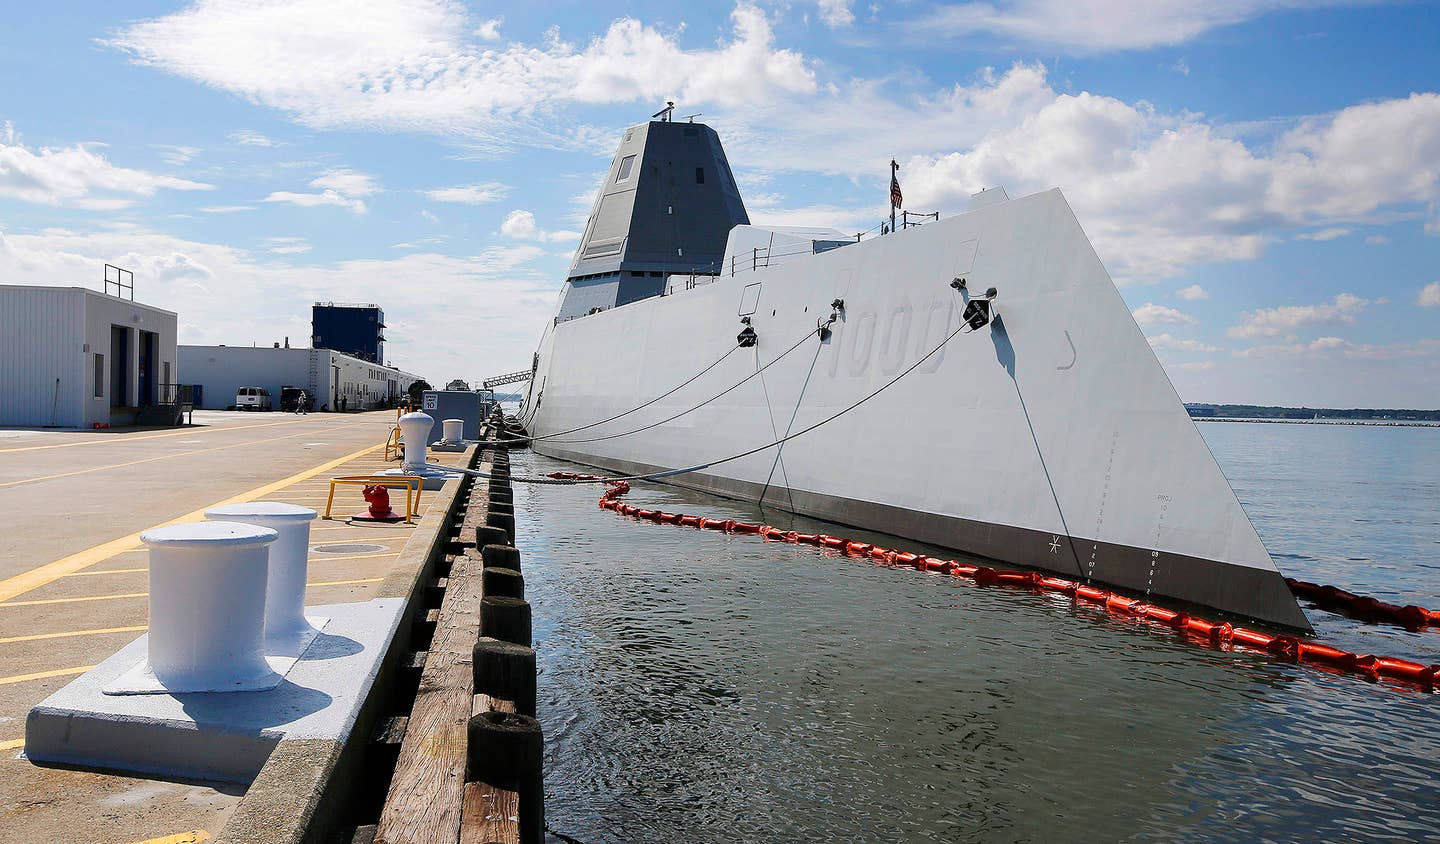 Check Out These Detailed Images Taken Aboard the Navy’s New Stealth Destroyer